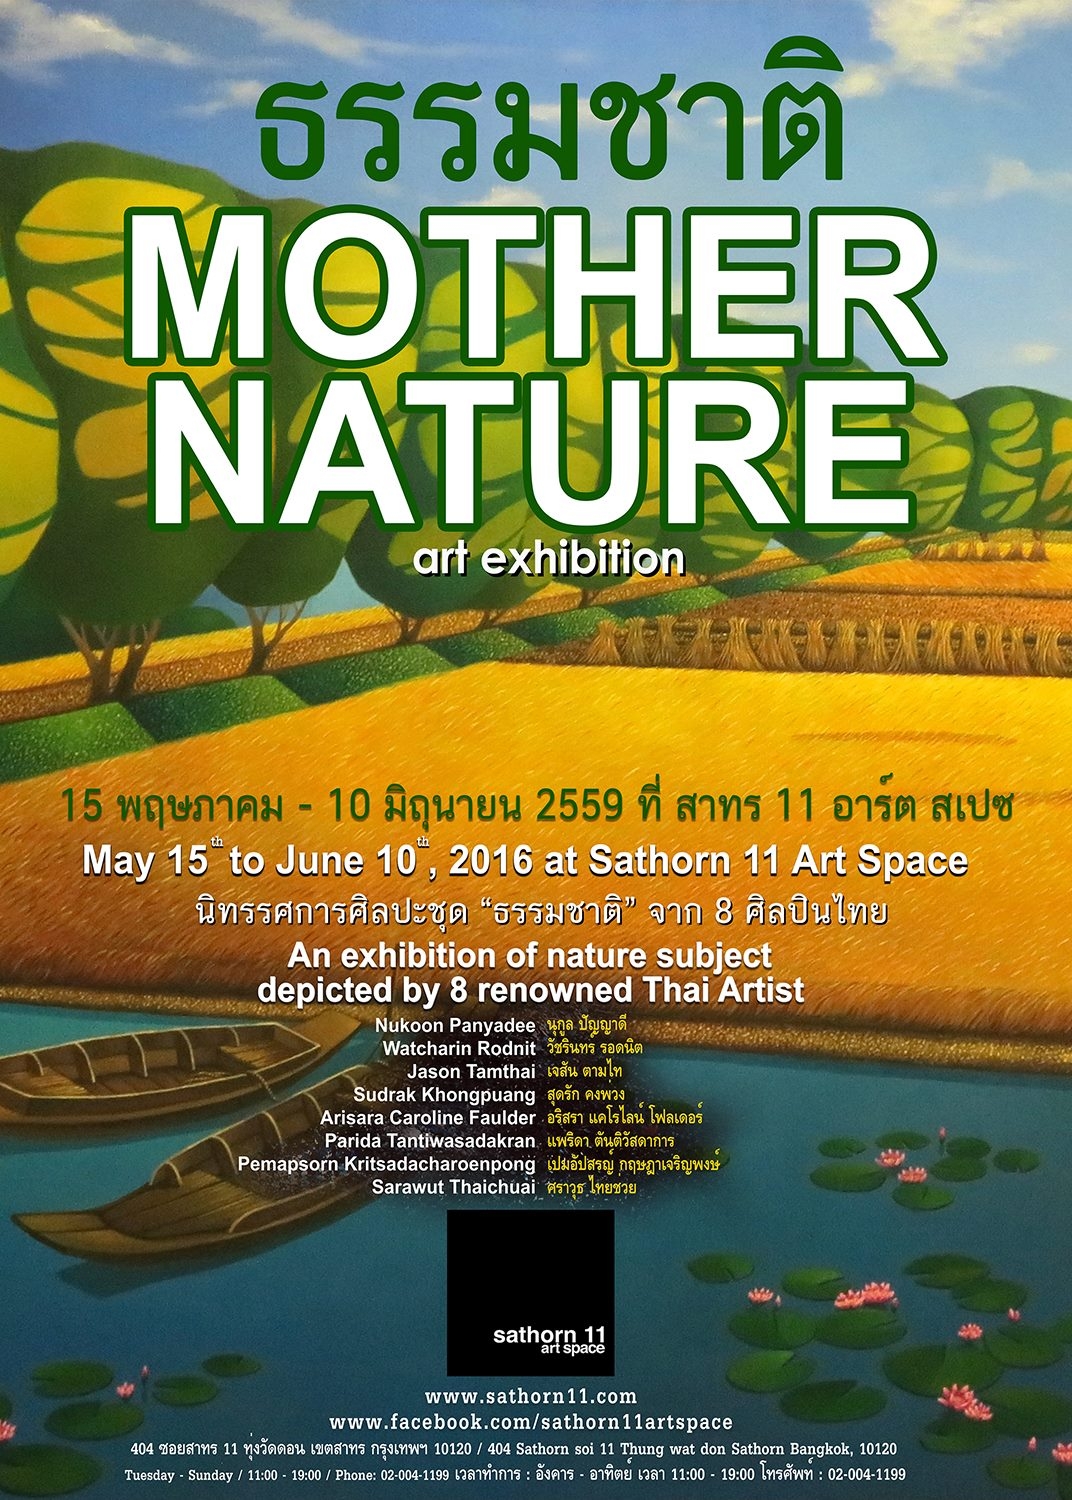 Group Art Exhibition 2016, “Mother Nature” in Bangkok, Thailand